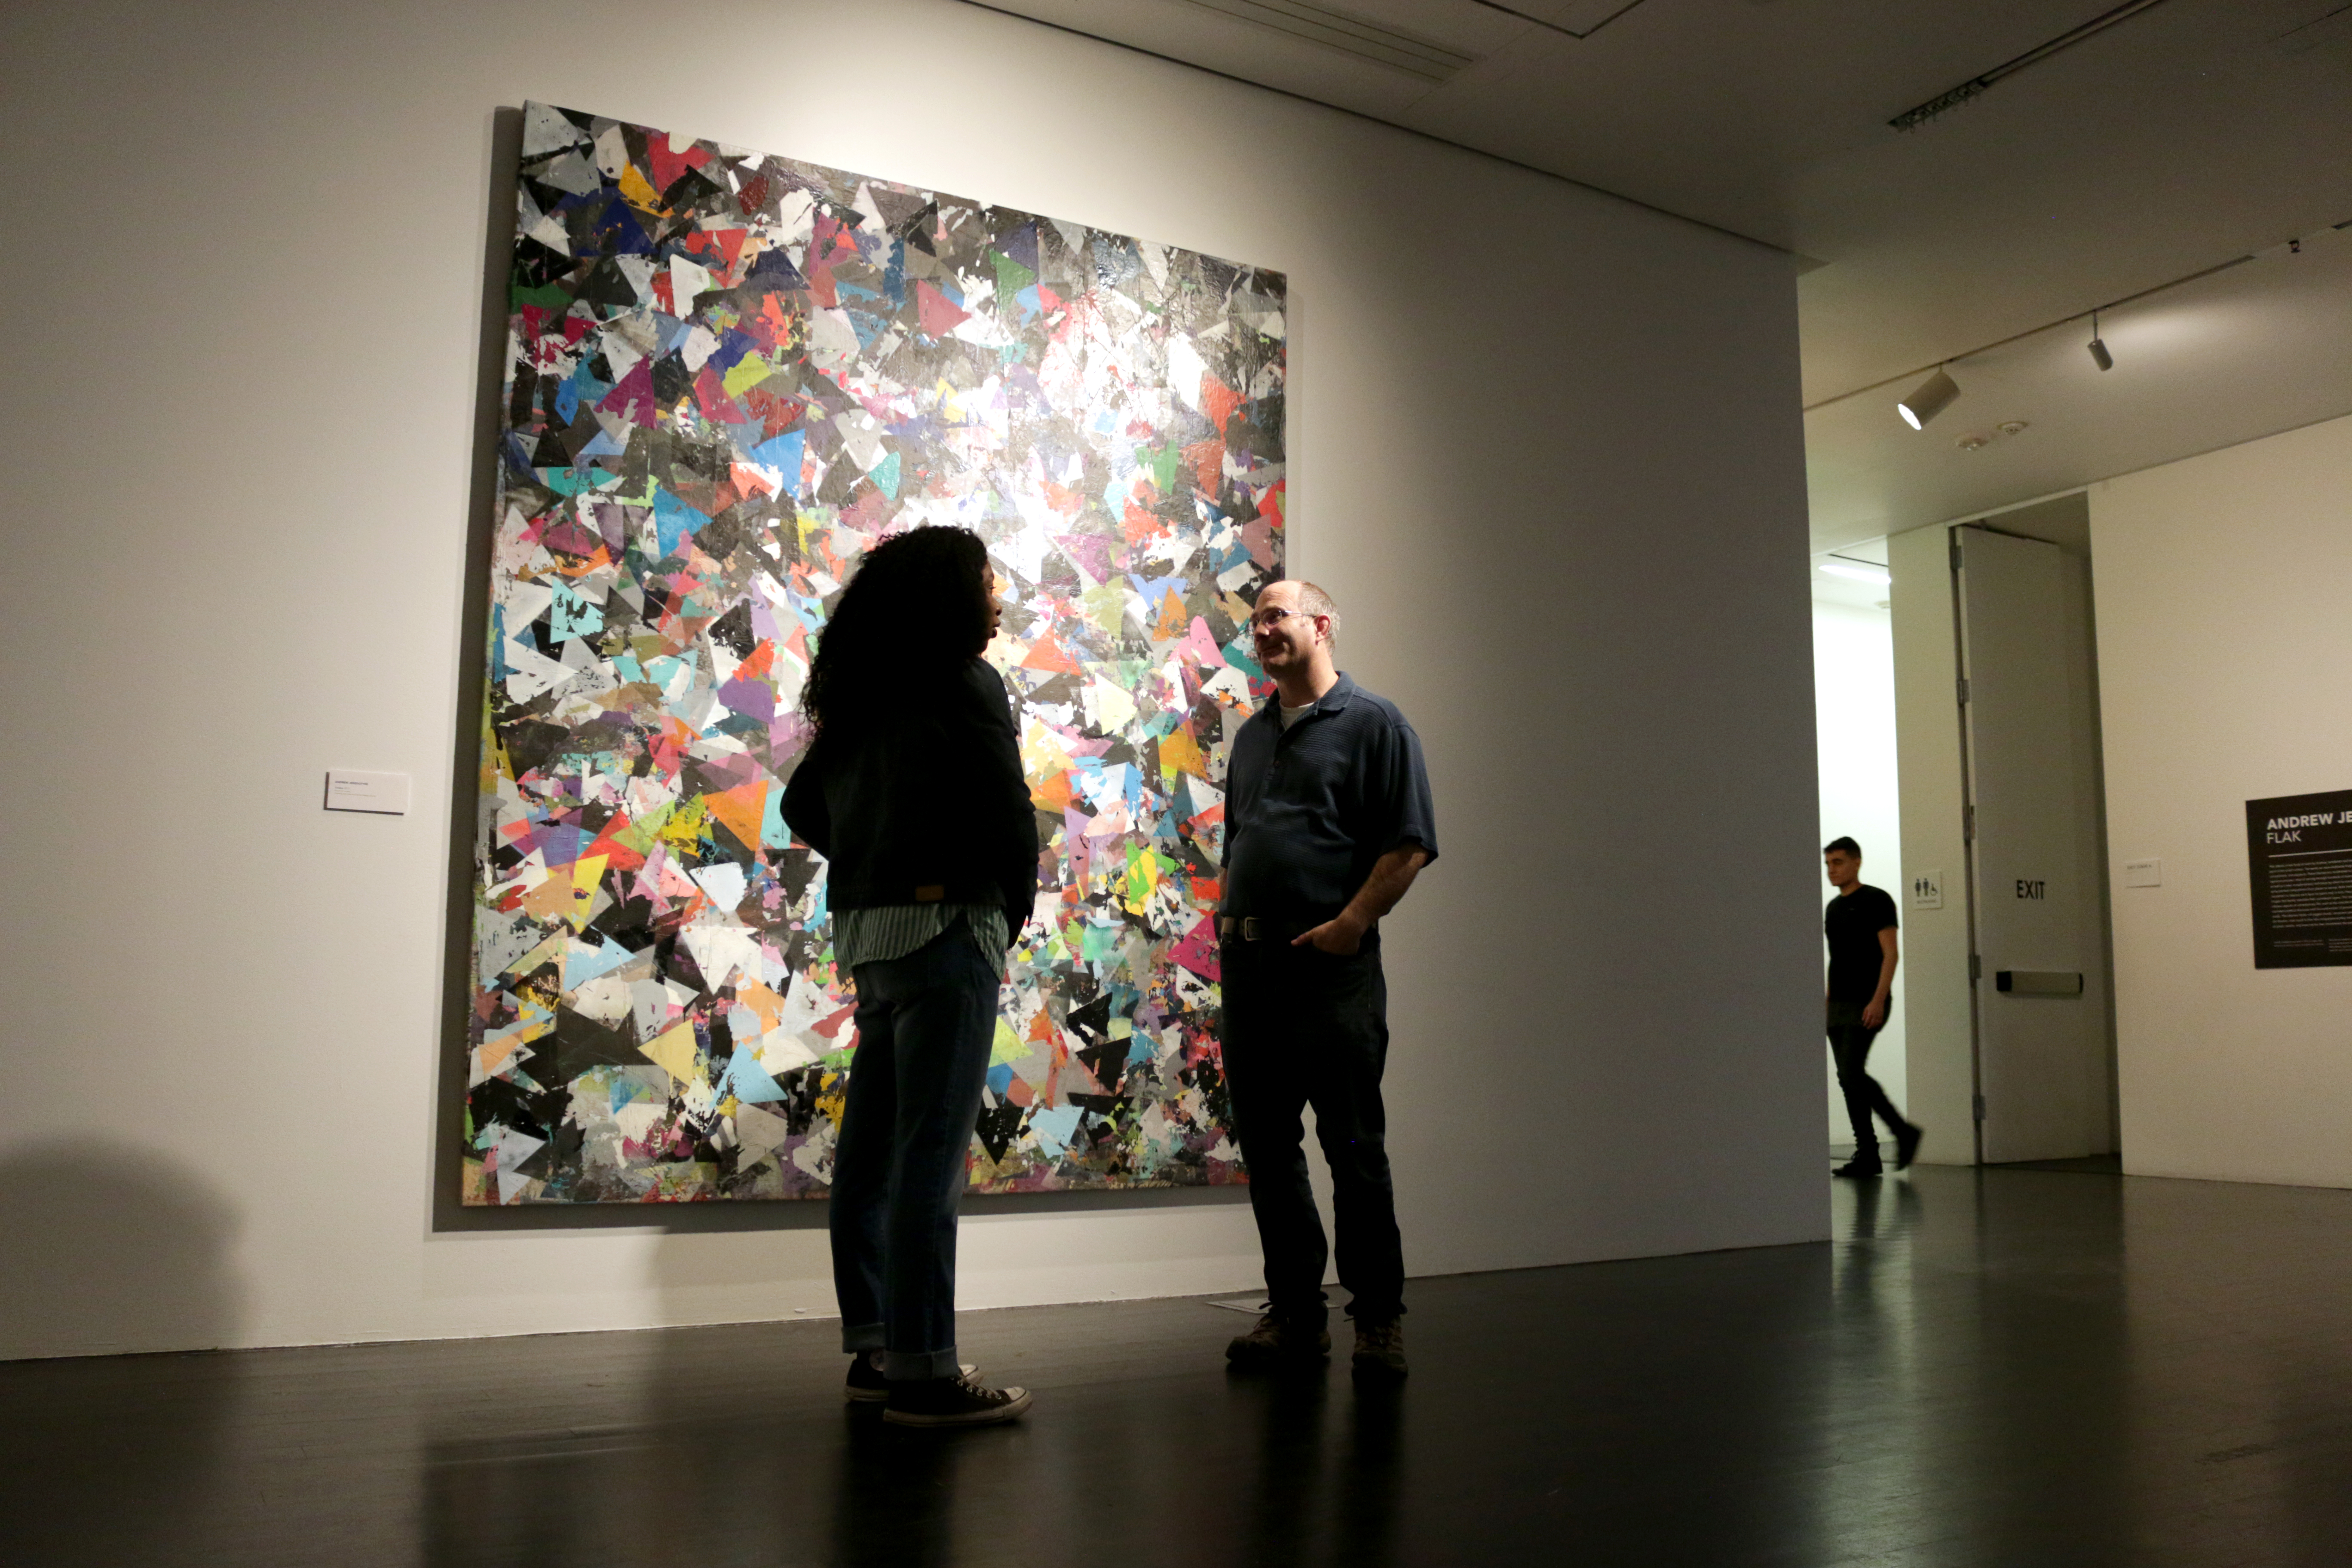 Two people talk ﻿in front of an abstract artwork in a dimly lit gallery. 